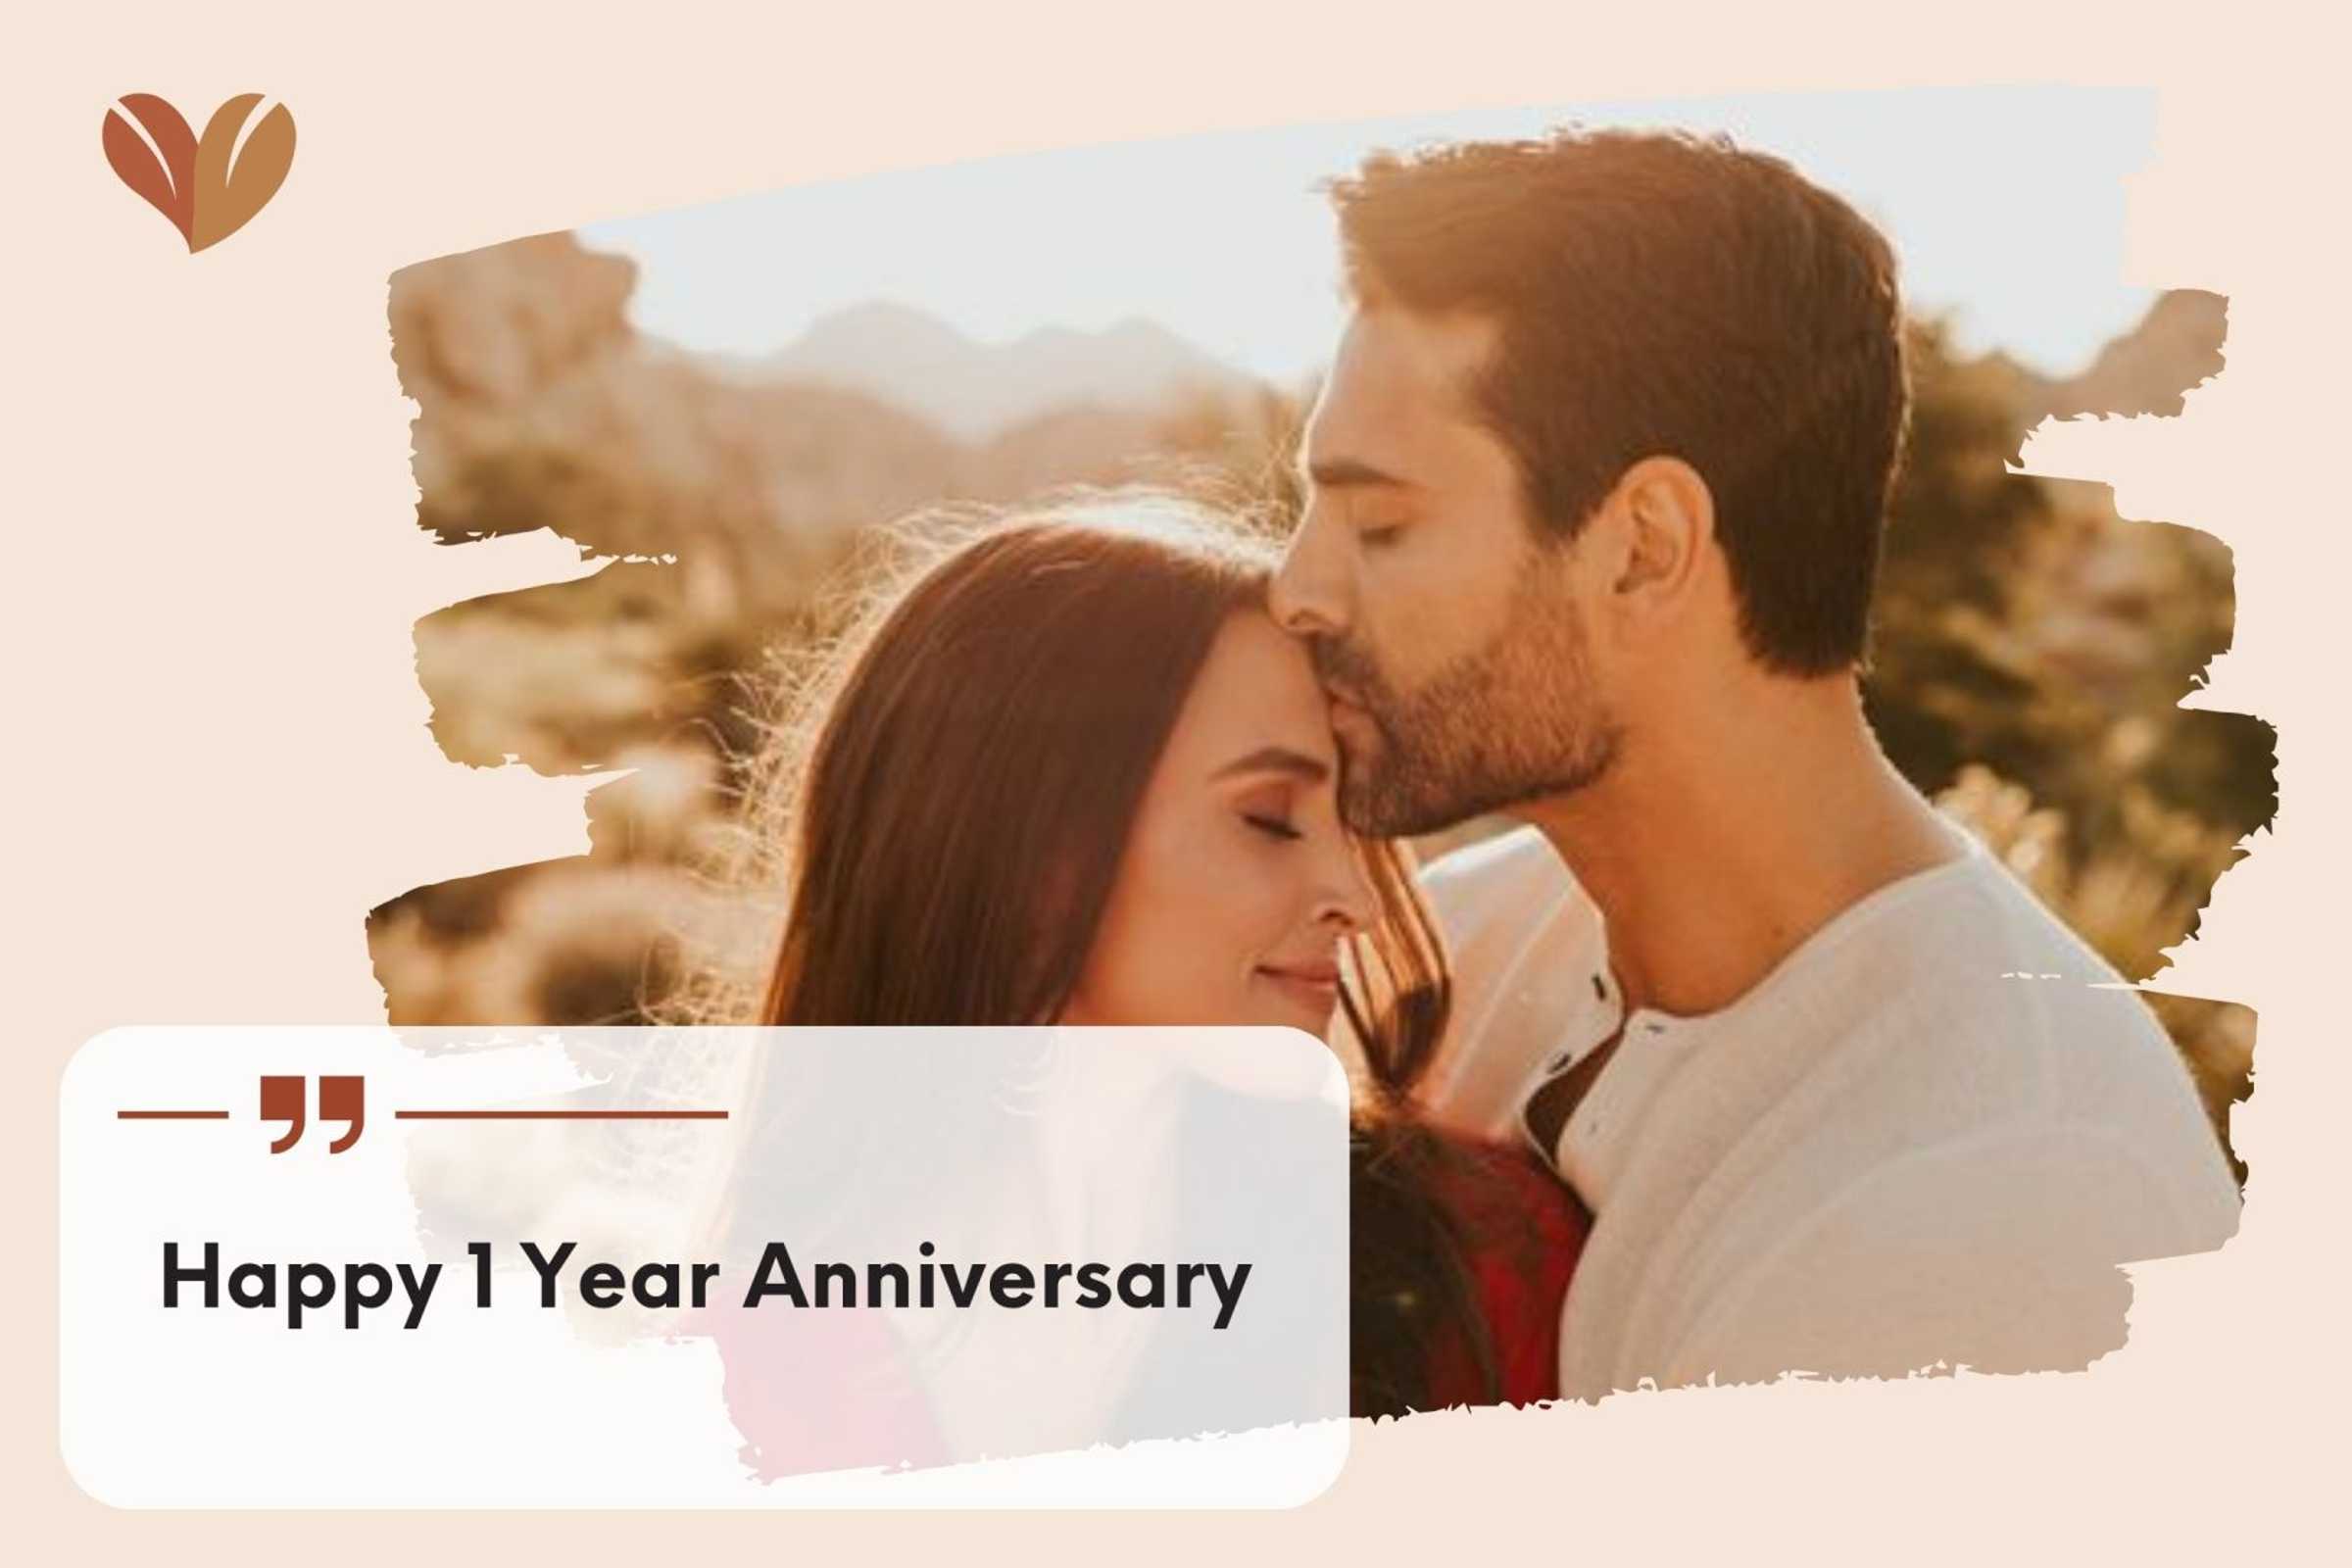 Heartwarming 1 Year Anniversary Quotes Carefully Selected by MyMindfulGifts